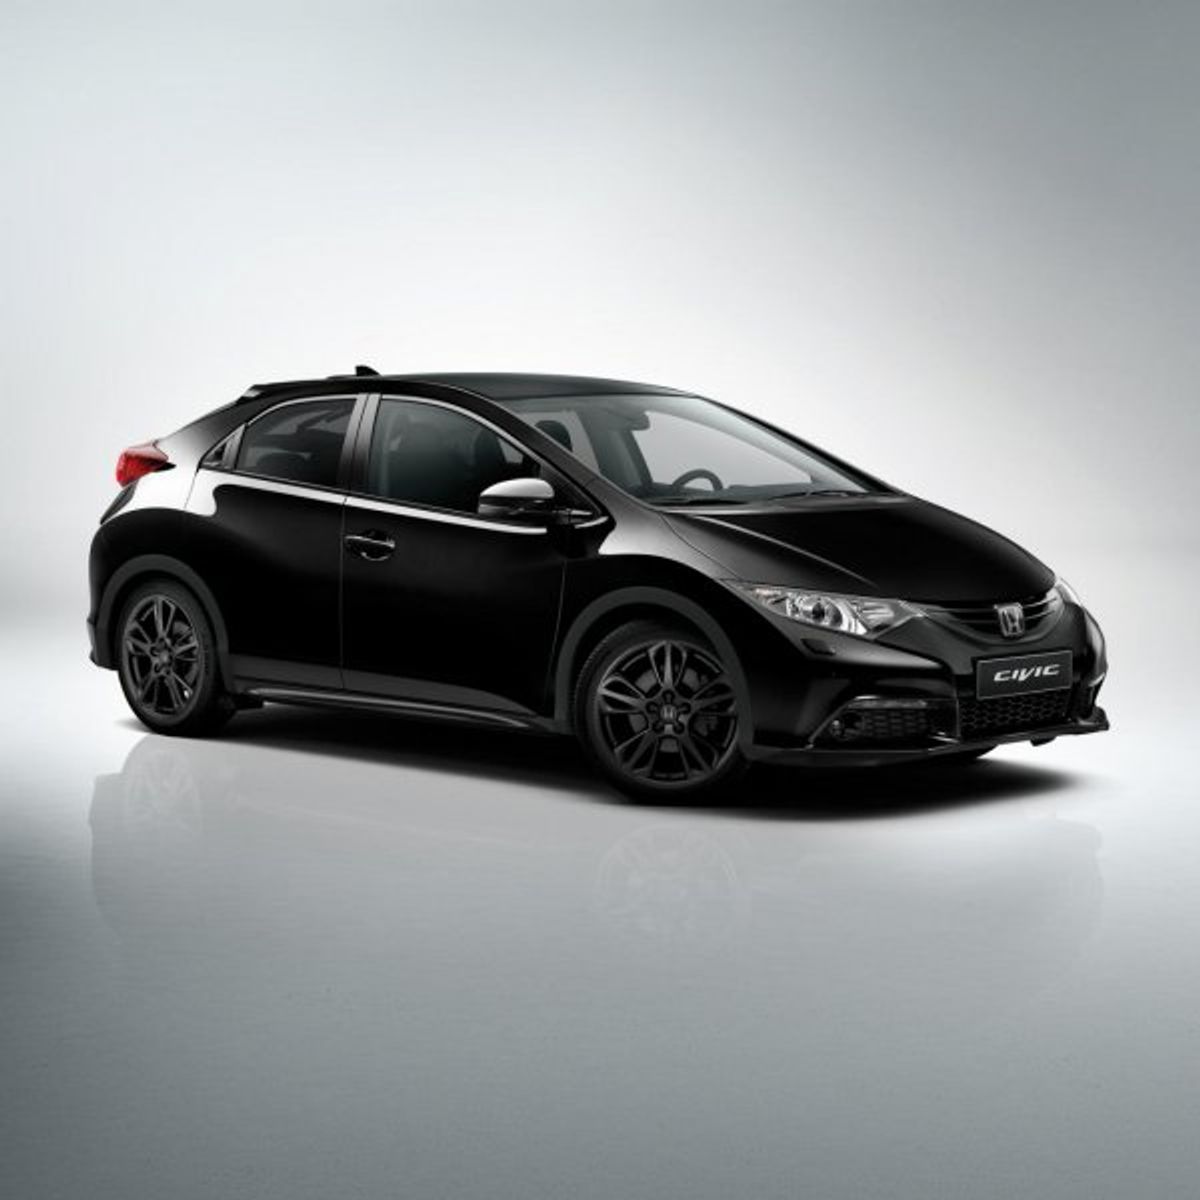 Honda Civic Black Edition Launched In UK - Cars.co.za